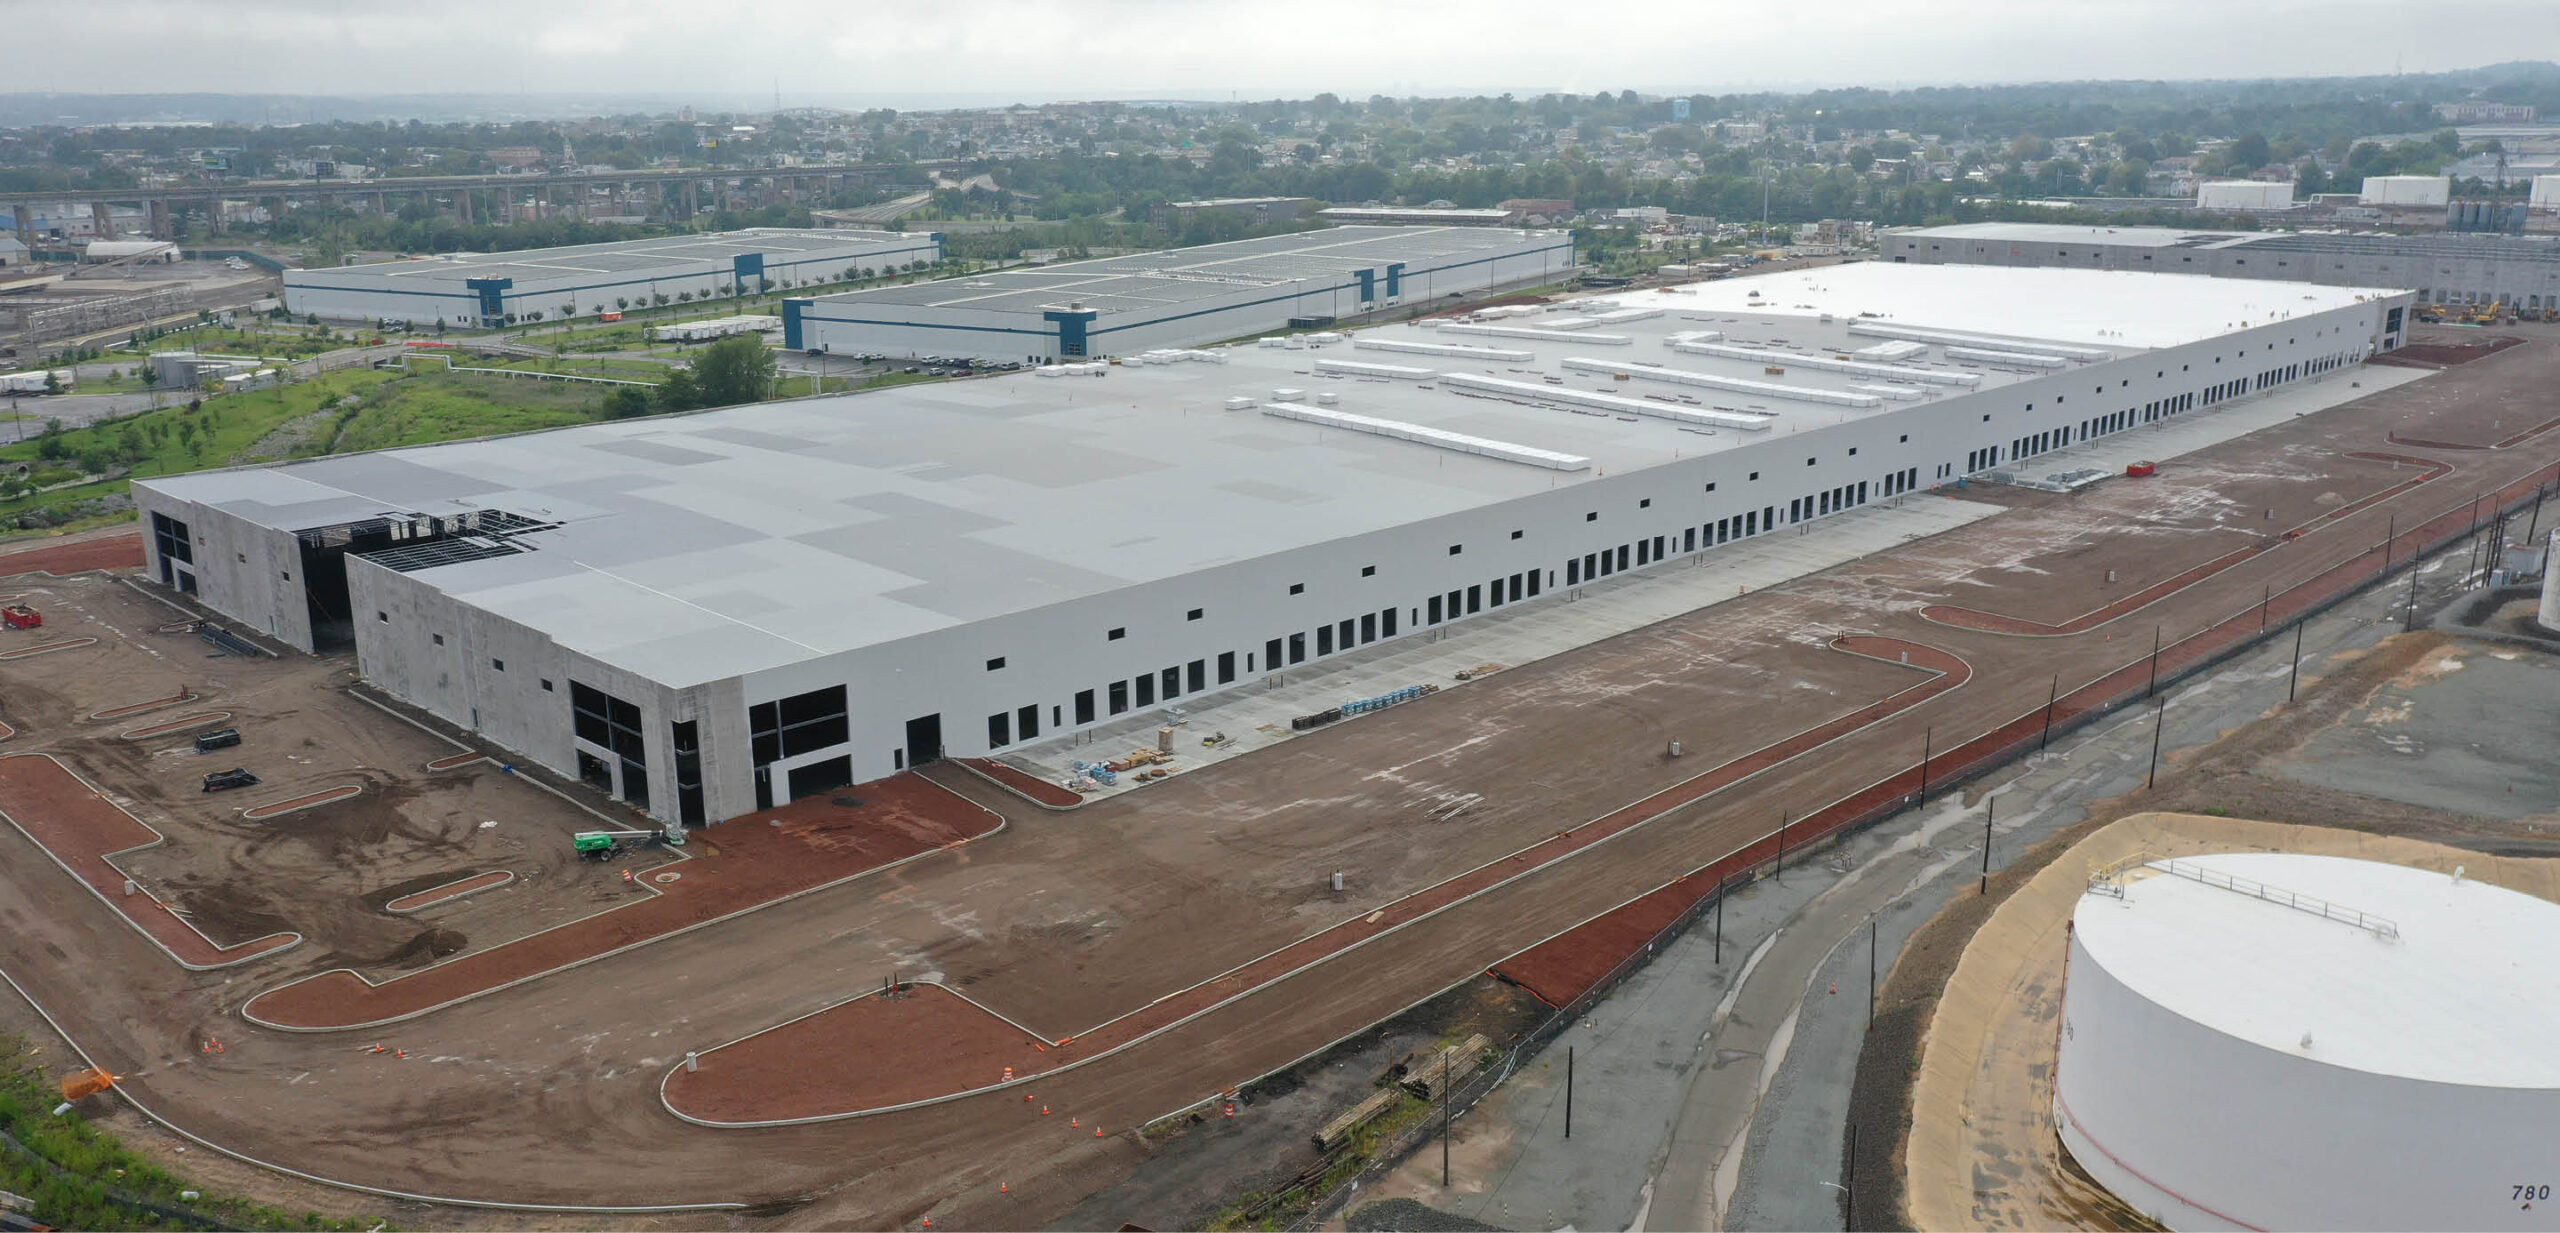 Large warehouse being built with roofing work